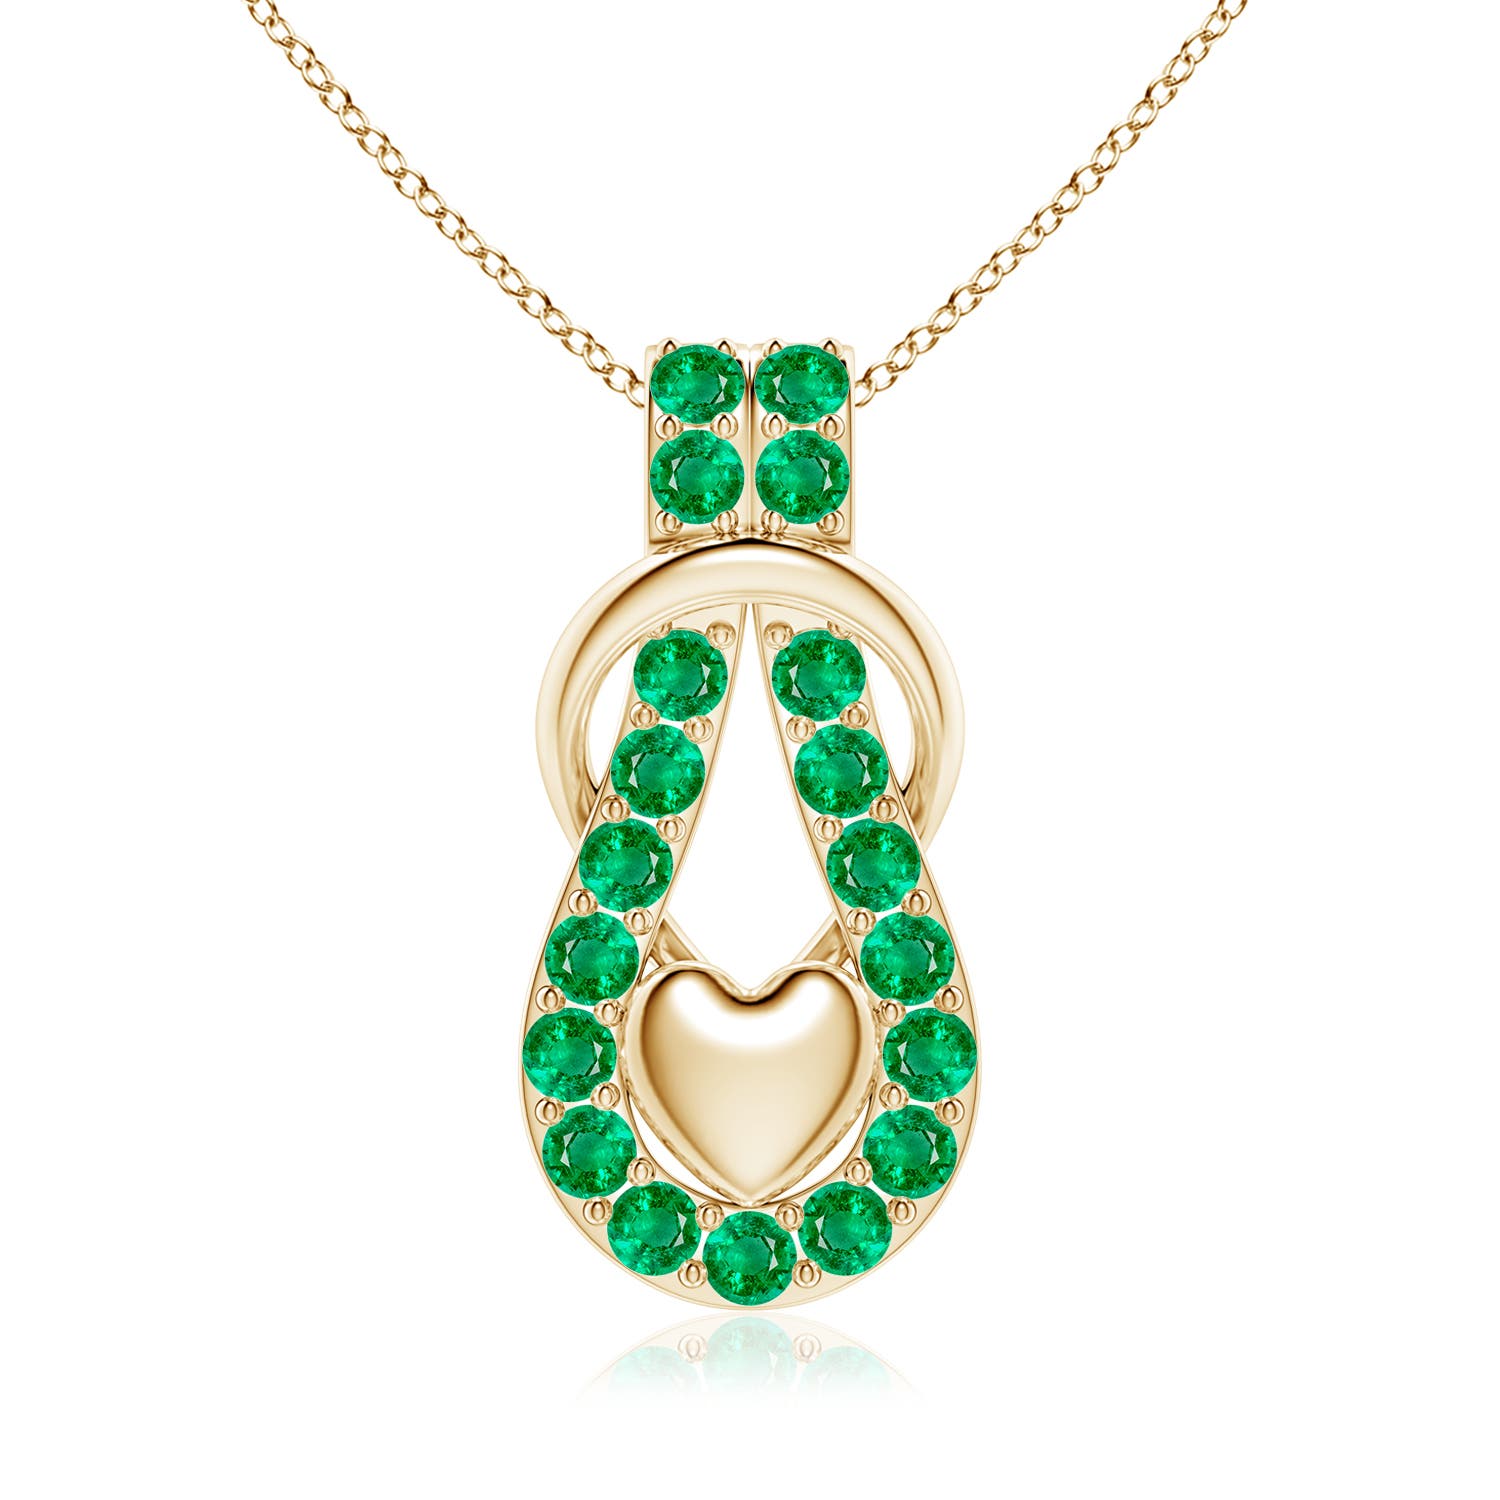 AAA - Emerald / 2.85 CT / 18 KT Yellow Gold